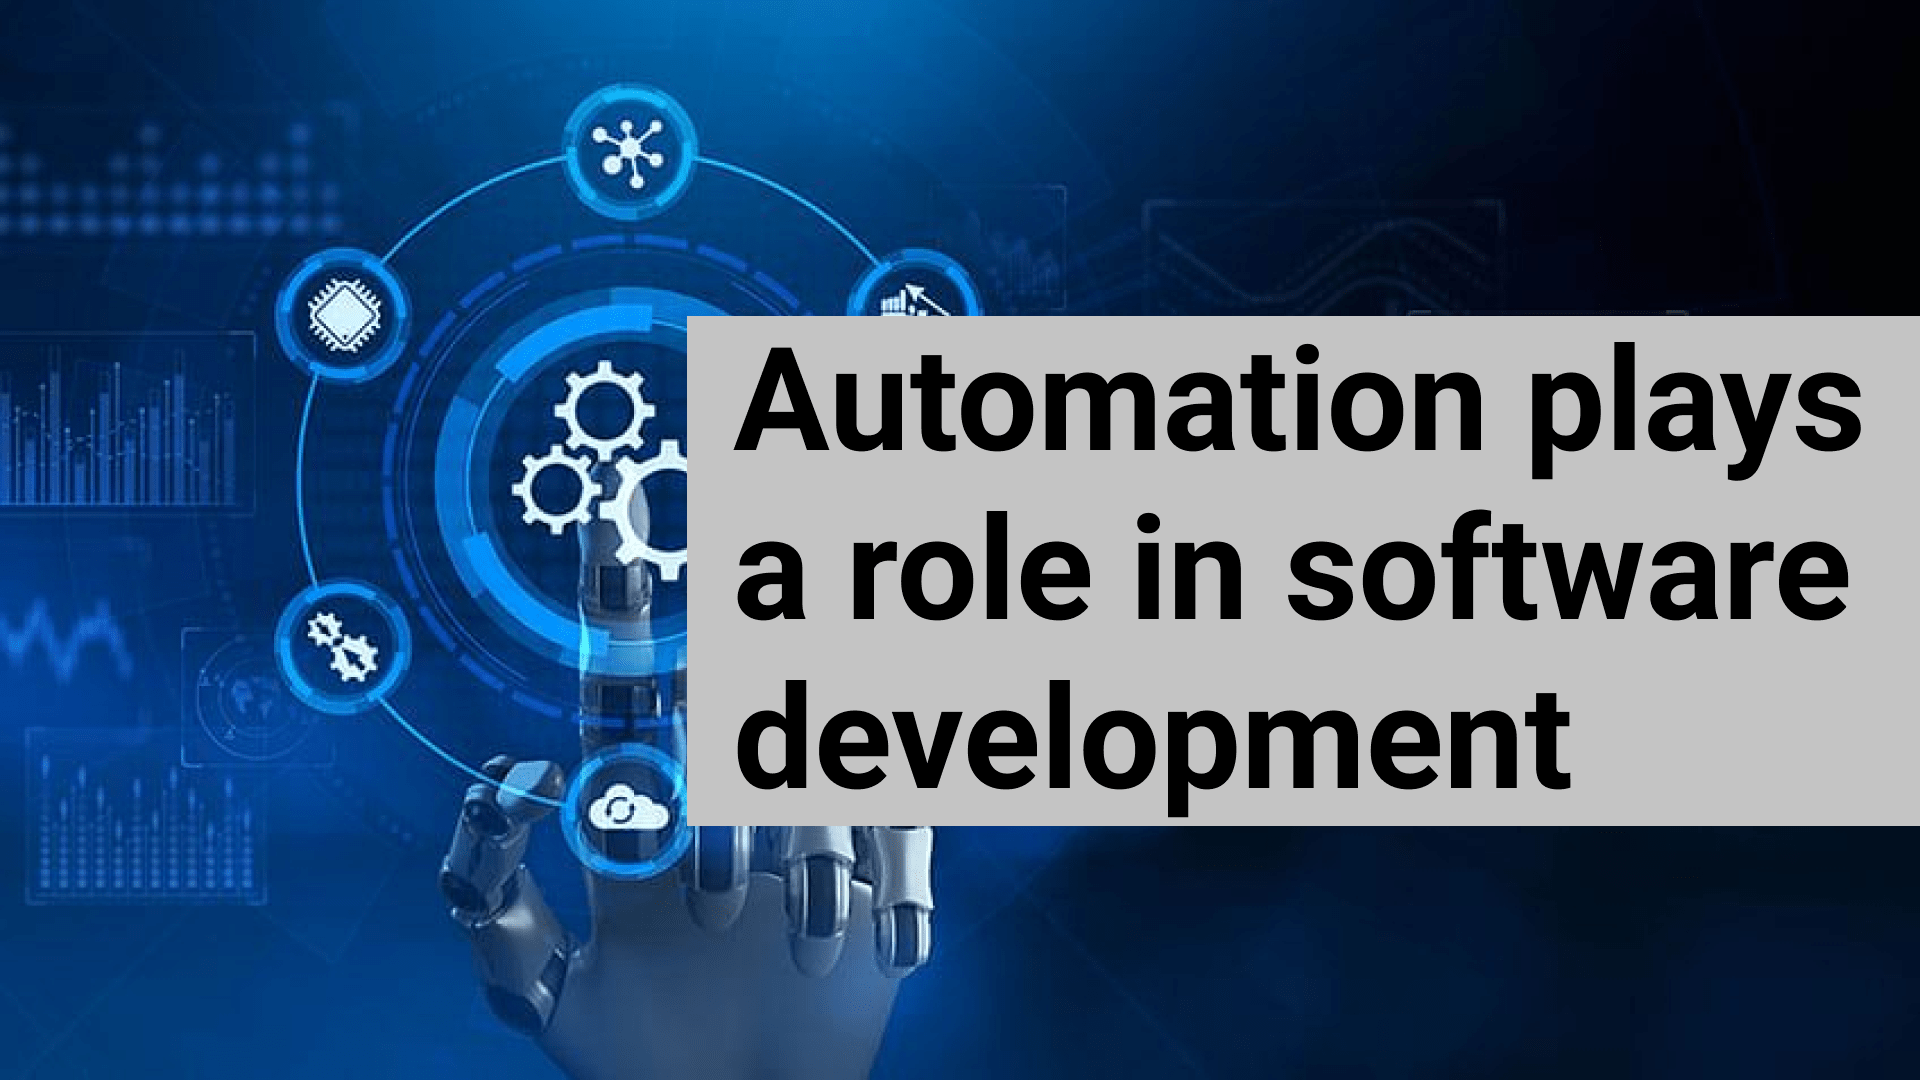 How does Test Automation play an important role in software development?